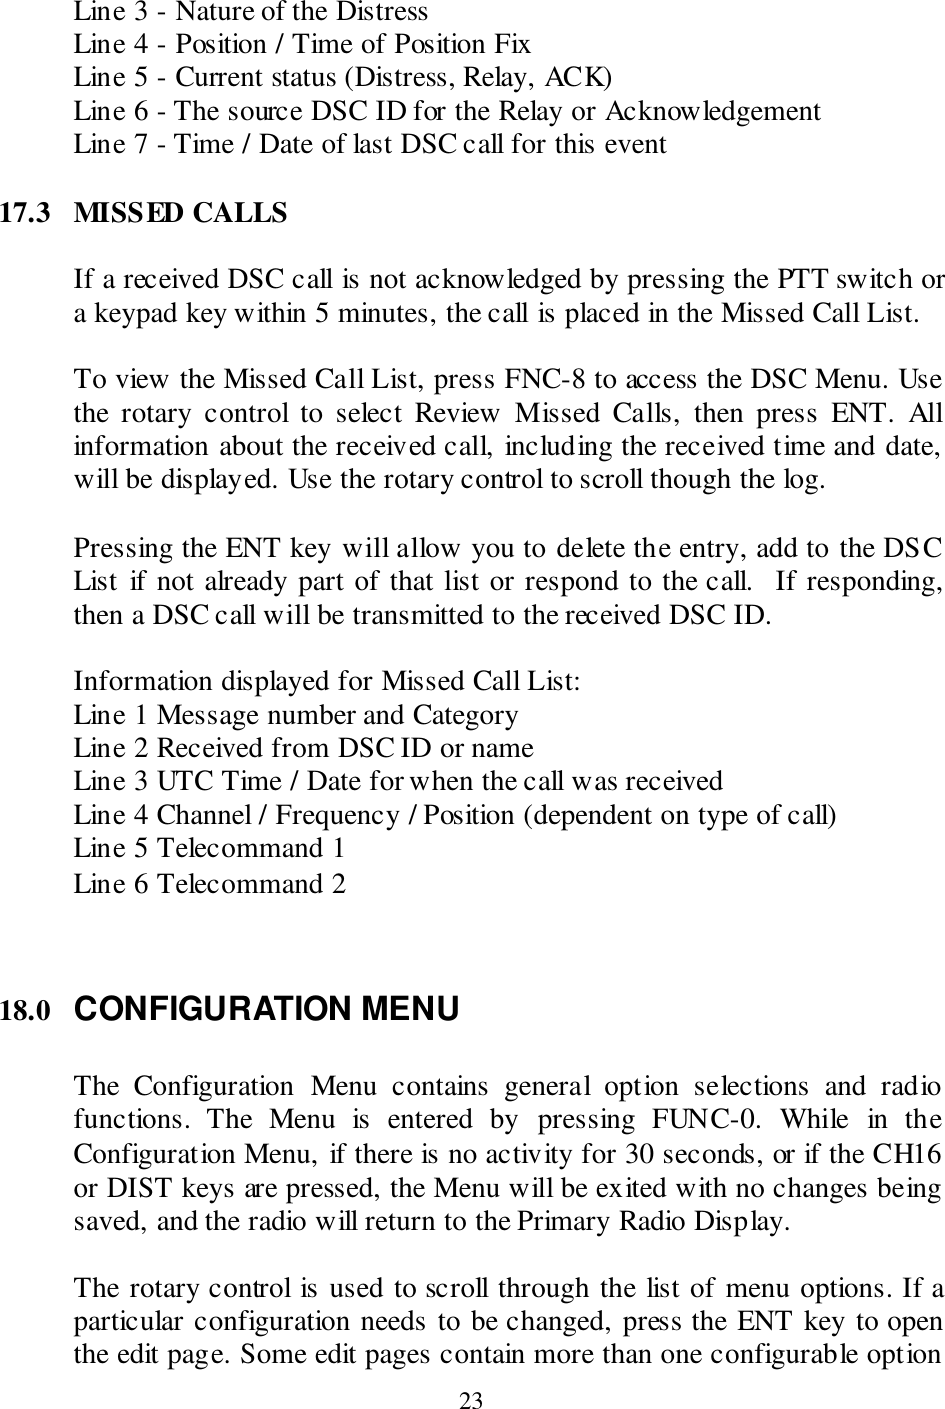  23 Line 3 - Nature of the Distress Line 4 - Position / Time of Position Fix Line 5 - Current status (Distress, Relay, ACK) Line 6 - The source DSC ID for the Relay or Acknowledgement Line 7 - Time / Date of last DSC call for this event  17.3  MISSED CALLS  If a received DSC call is not acknowledged by pressing the PTT switch or a keypad key within 5 minutes, the call is placed in the Missed Call List.    To view the Missed Call List, press FNC-8 to access the DSC Menu. Use the  rotary  control  to  select  Review  Missed  Calls,  then  press  ENT.  All information about the received call, including the received time and date, will be displayed. Use the rotary control to scroll though the log.    Pressing the ENT key will allow you to delete the entry, add to the DSC List  if not already part of that list or respond to the call.  If responding, then a DSC call will be transmitted to the received DSC ID.  Information displayed for Missed Call List: Line 1 Message number and Category Line 2 Received from DSC ID or name Line 3 UTC Time / Date for when the call was received Line 4 Channel / Frequency / Position (dependent on type of call) Line 5 Telecommand 1 Line 6 Telecommand 2    18.0 CONFIGURATION MENU  The  Configuration  Menu  contains  general  option  selections  and  radio functions.  The  Menu  is  entered  by  pressing  FUNC-0.  While  in  the Configuration Menu, if there is no activity for 30 seconds, or if the CH16 or DIST keys are pressed, the Menu will be exited with no changes being saved, and the radio will return to the Primary Radio Display.  The rotary control is used to scroll through the list of menu options. If a particular configuration needs to be changed, press the ENT key to open the edit page. Some edit pages contain more than one configurable option 